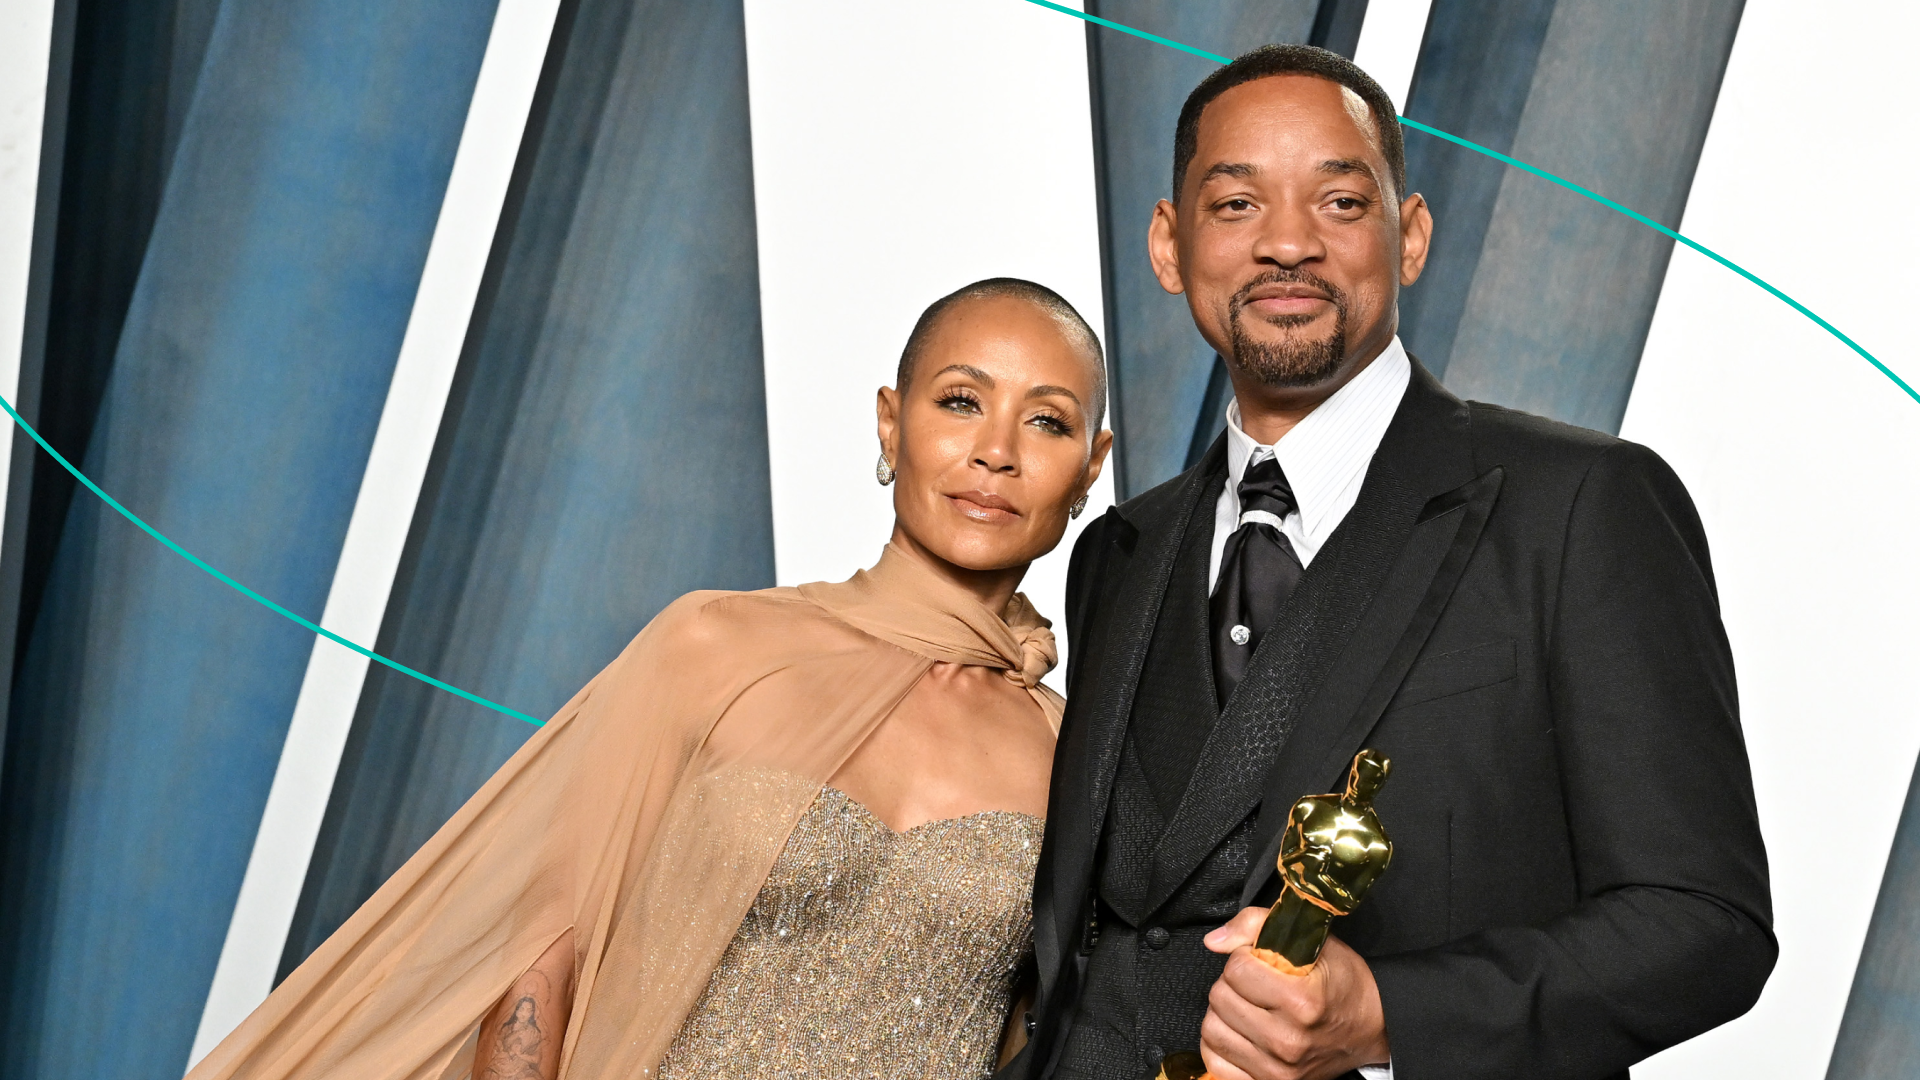 Jada Pinkett Smith stands with husband Will Smith and his Oscar